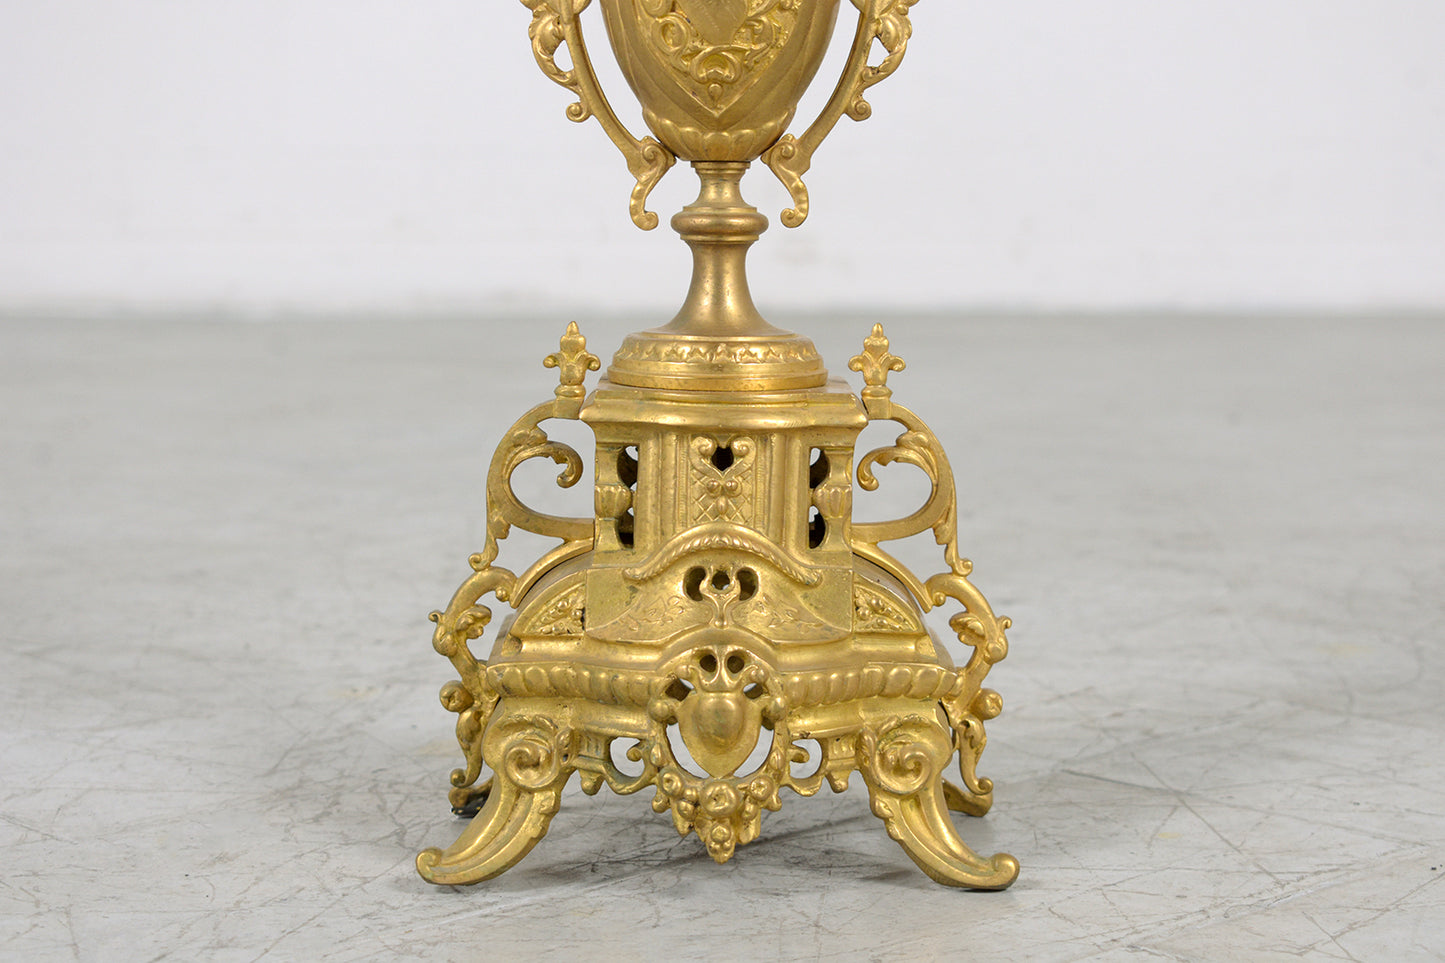 Pair of French Antique Ormolu Candleholder